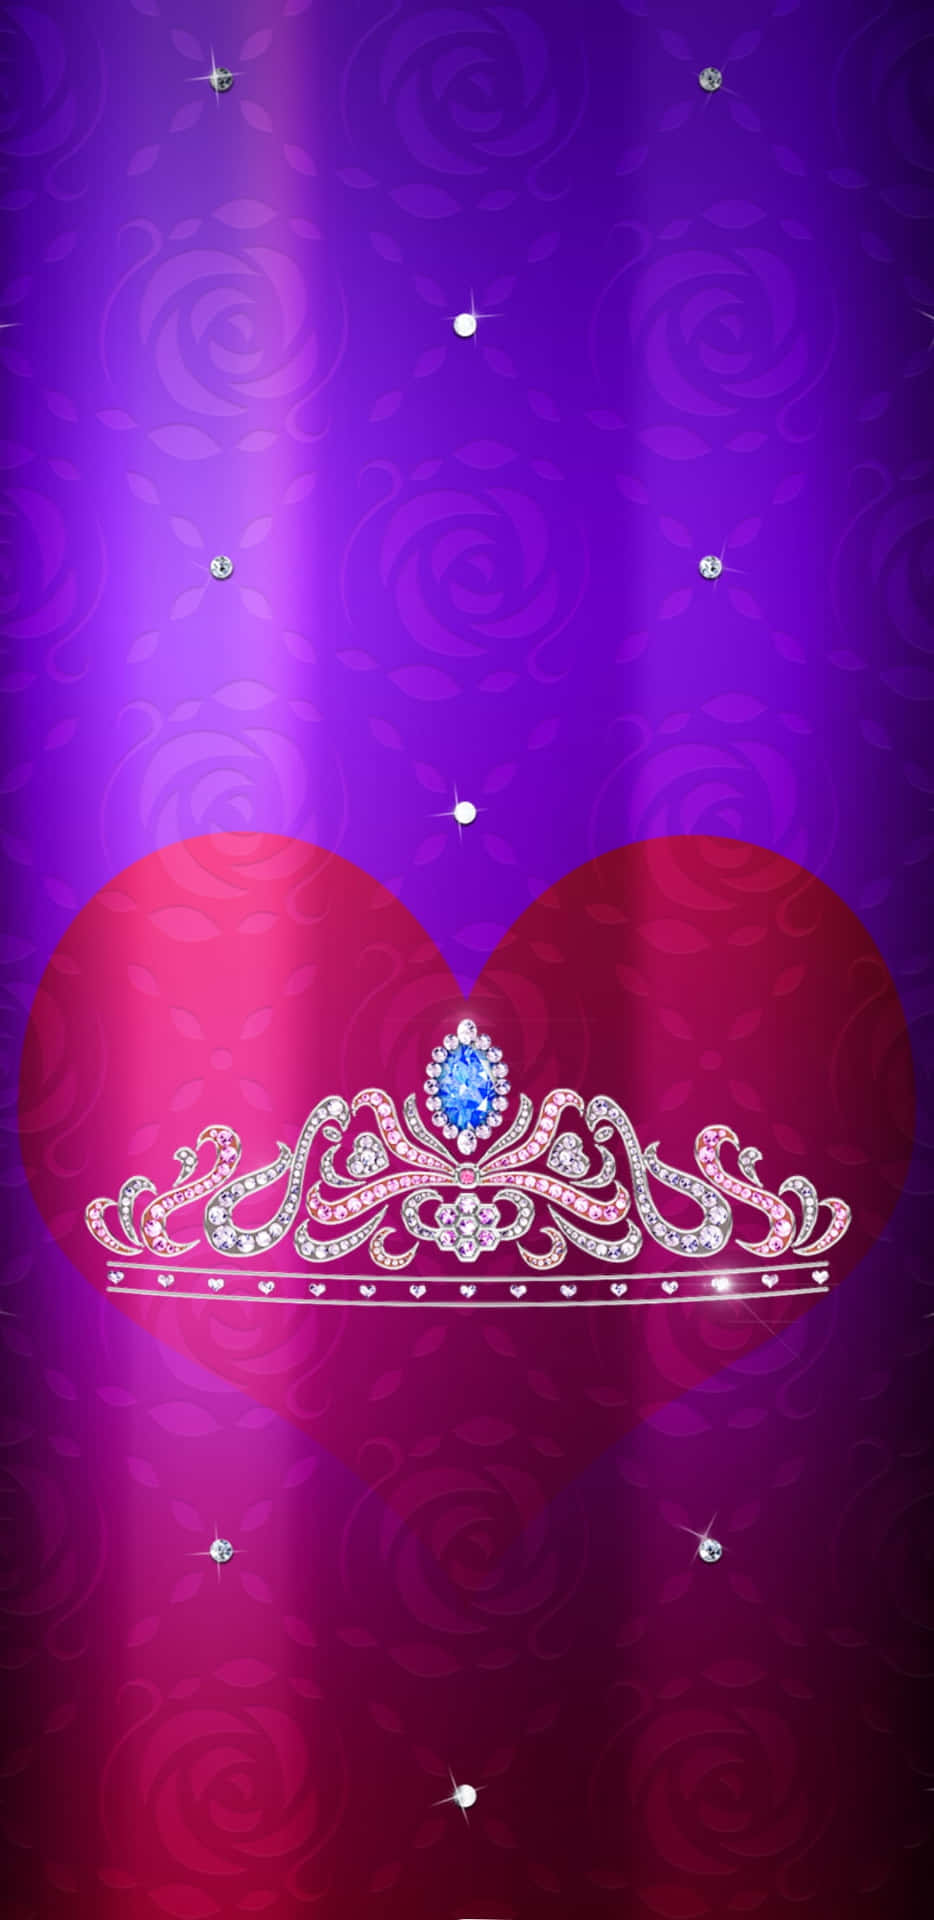 Be regal and majesty with this beautiful Princess Crown. Wallpaper